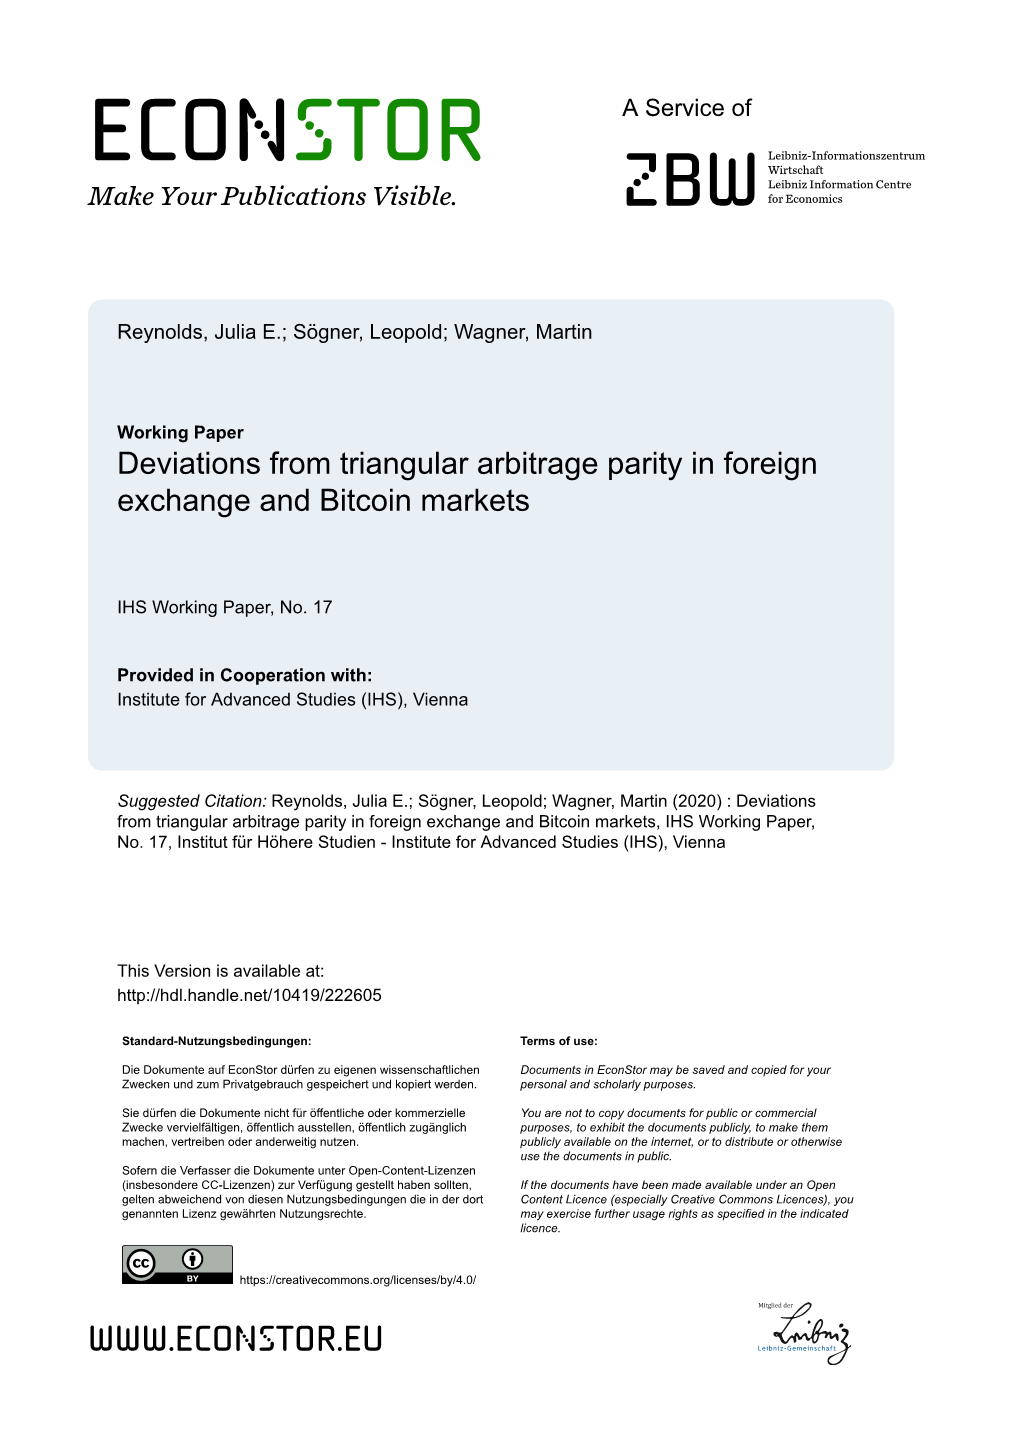 Deviations from Triangular Arbitrage Parity in Foreign Exchange and Bitcoin Markets